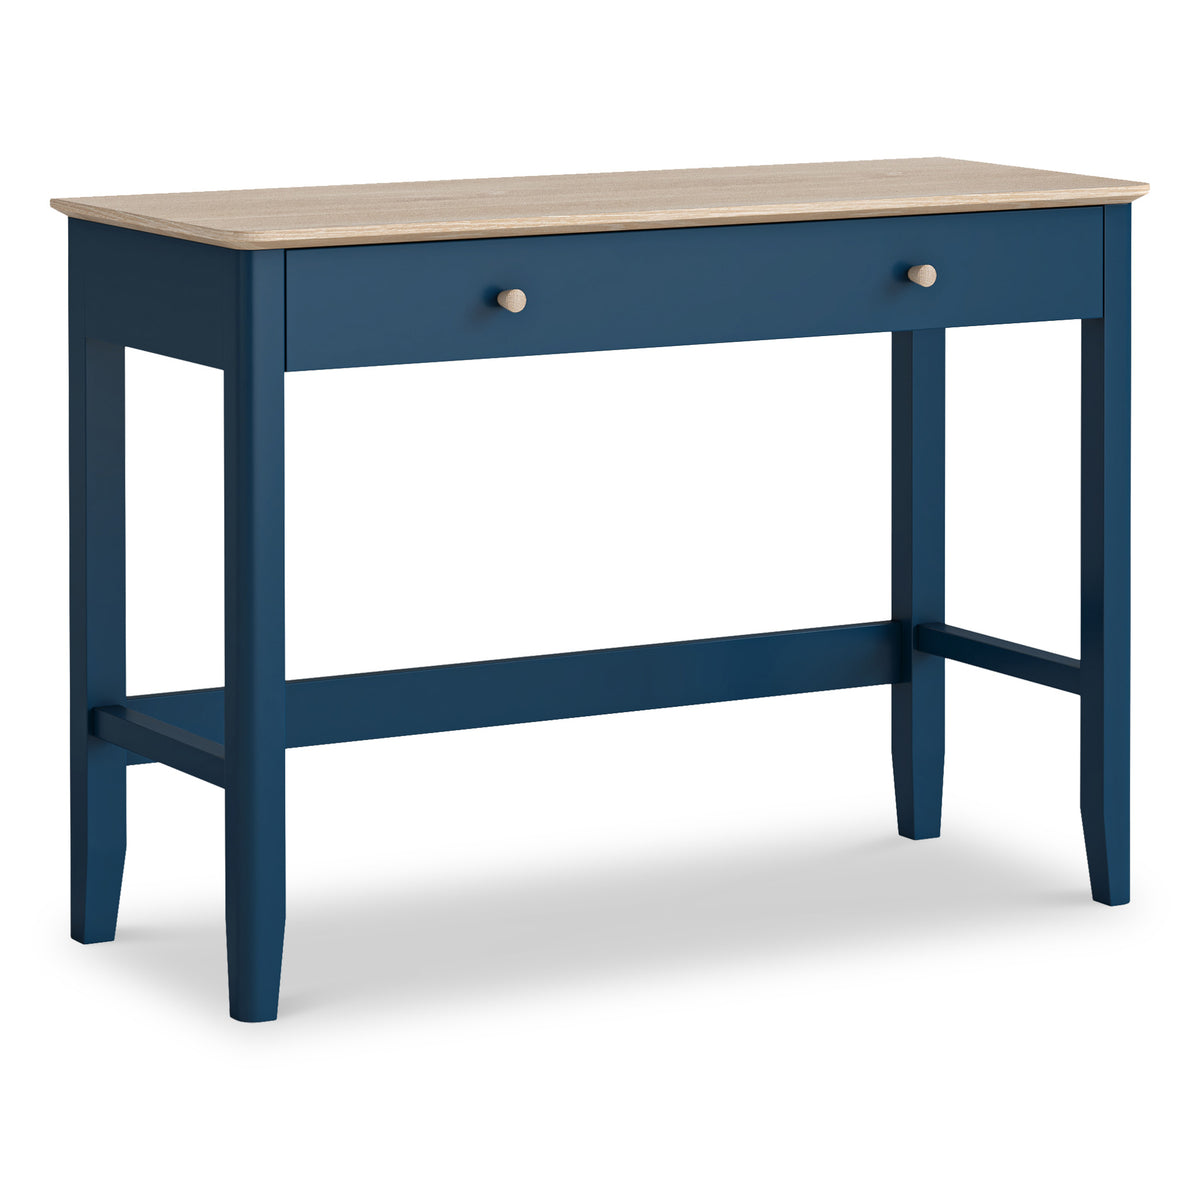 Penrose Navy Blue Home Office Desk with wooden handles